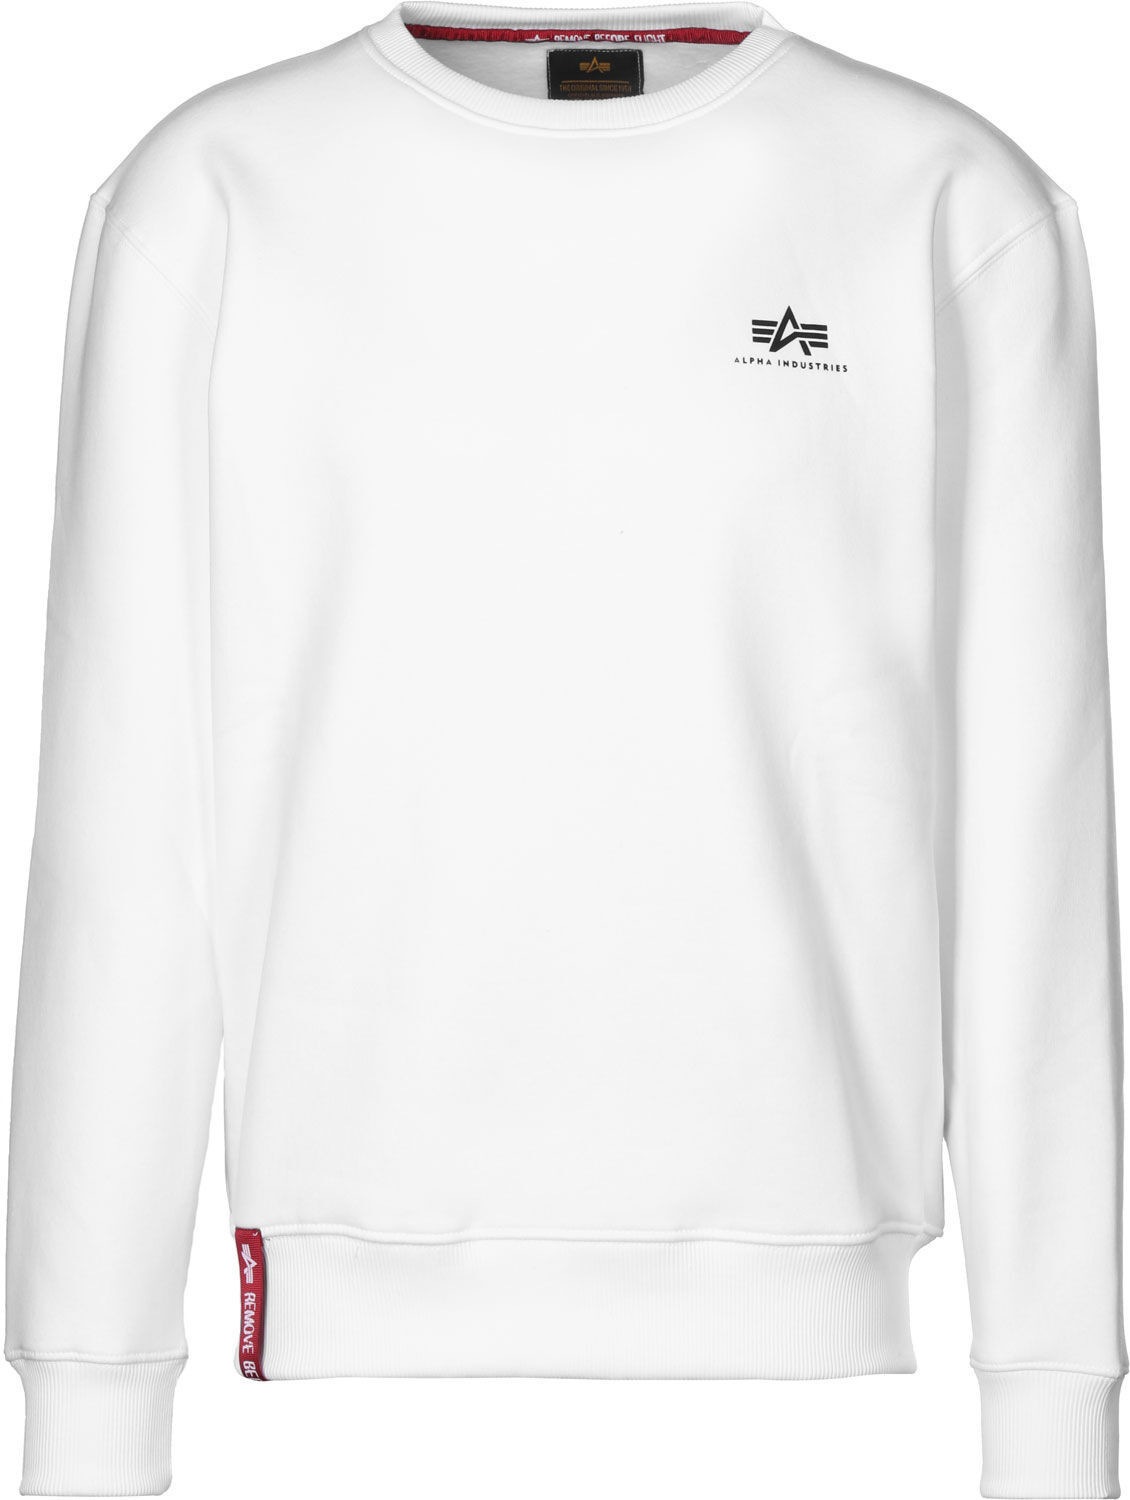 White - (188307/09) - Sweater Logo The Small Alpha 515 Industries Basic